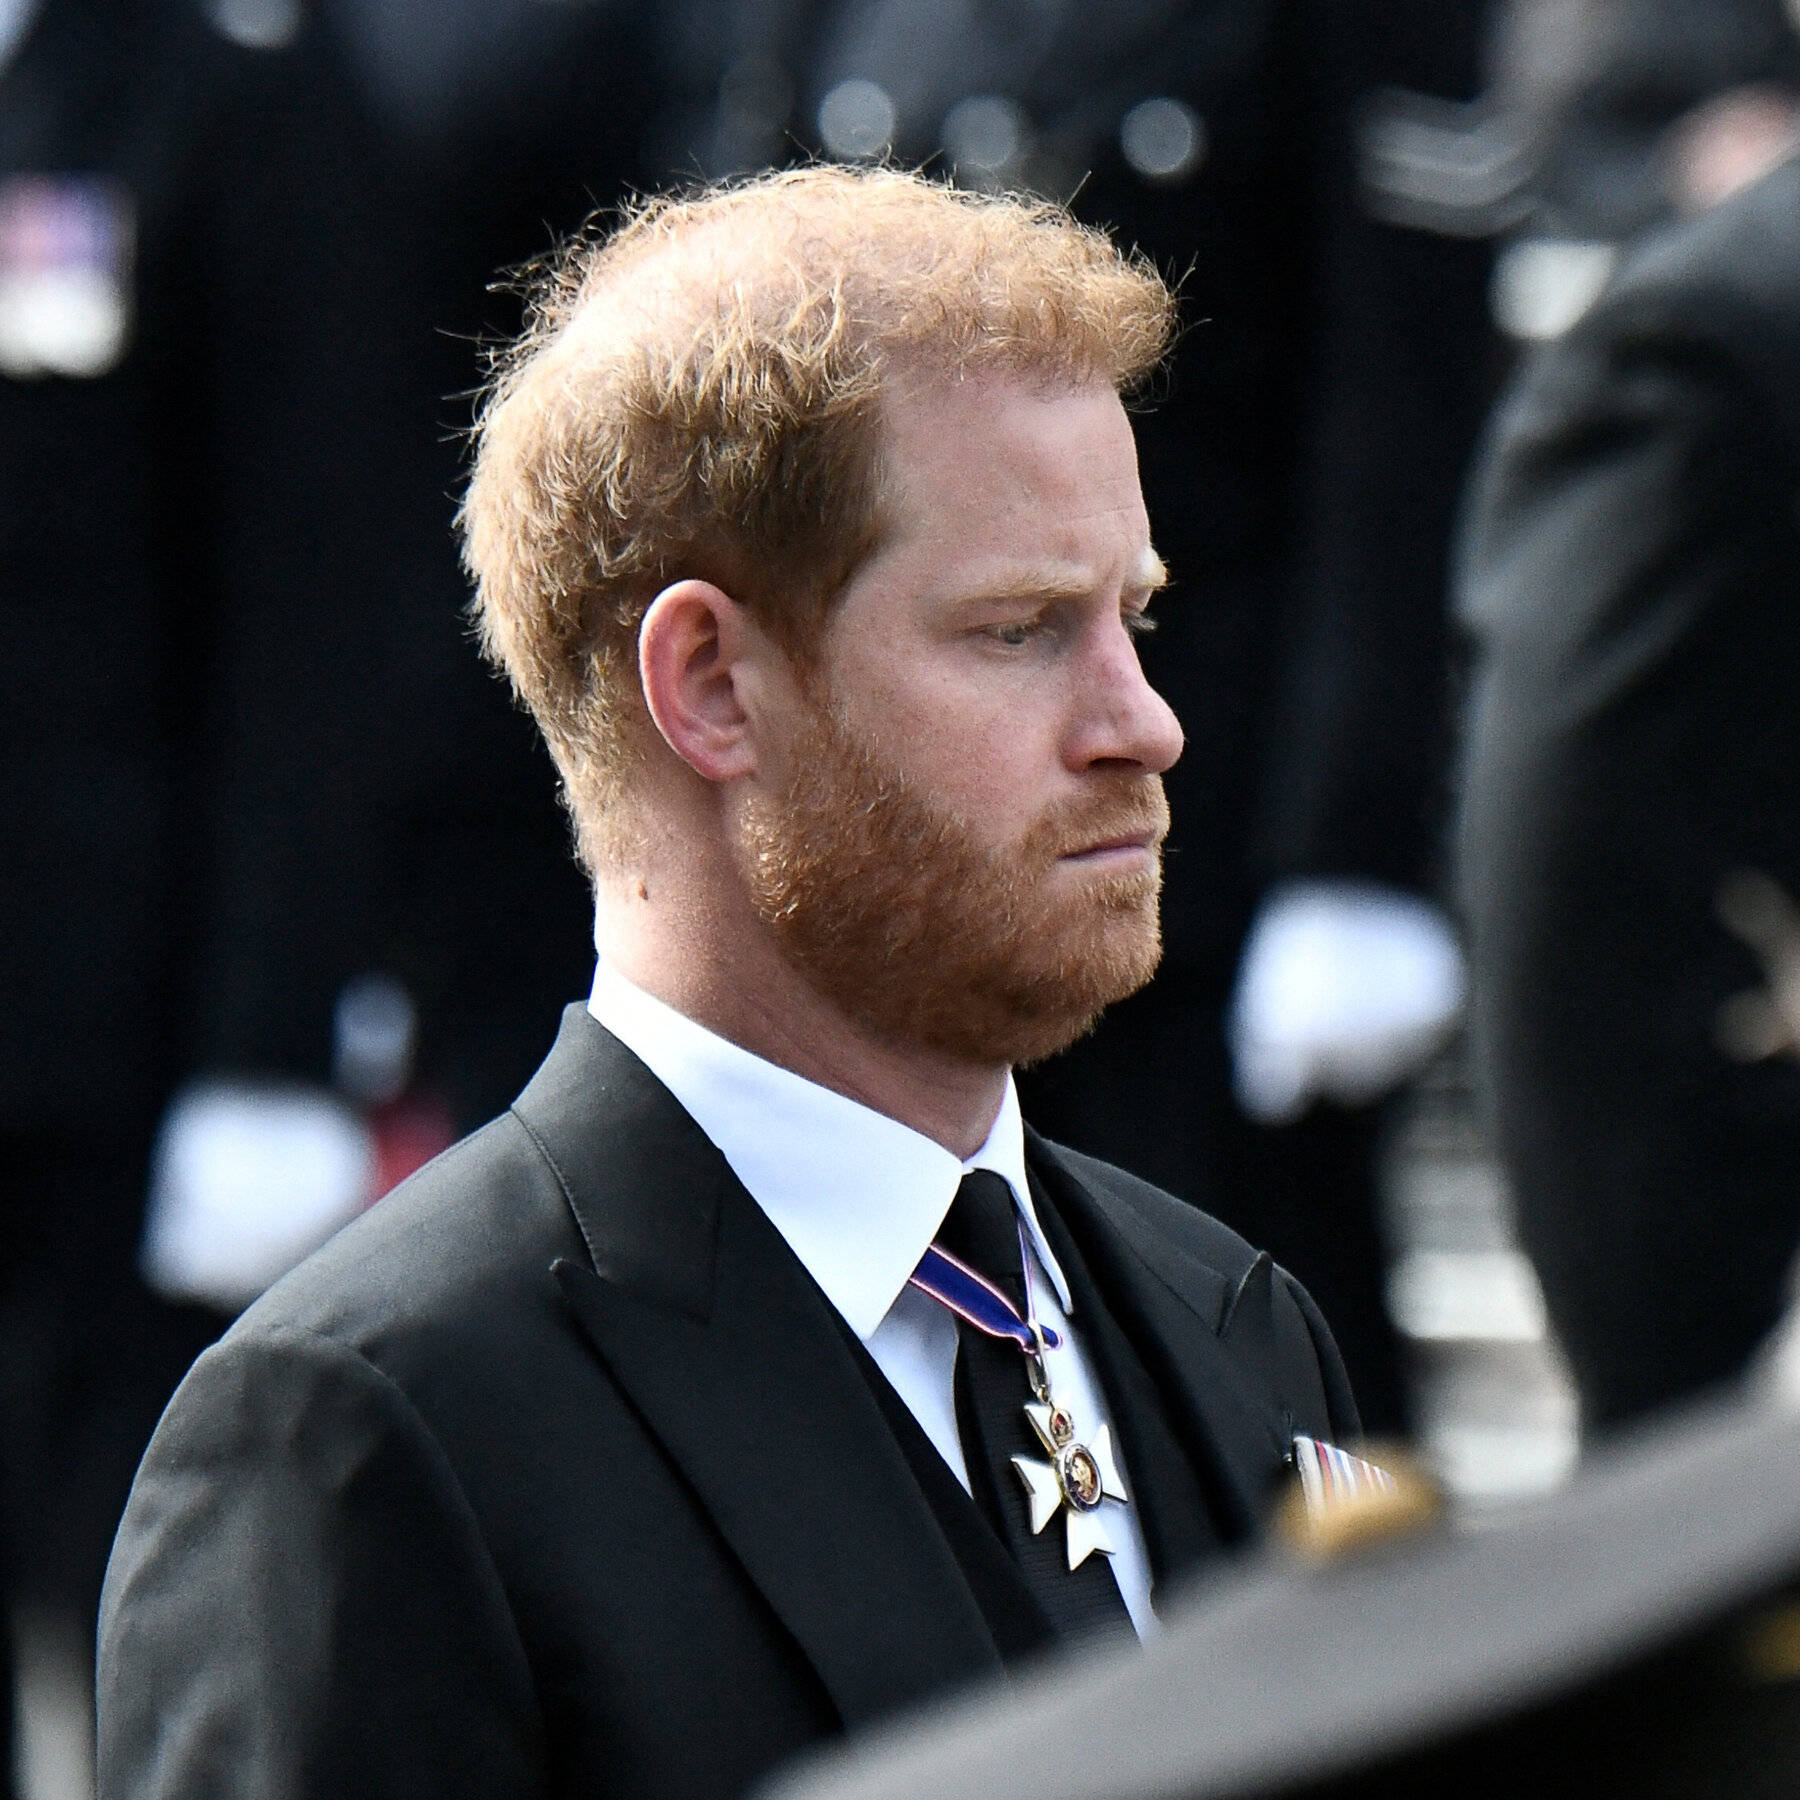 An Emotional Moment Captured Of Prince Harry